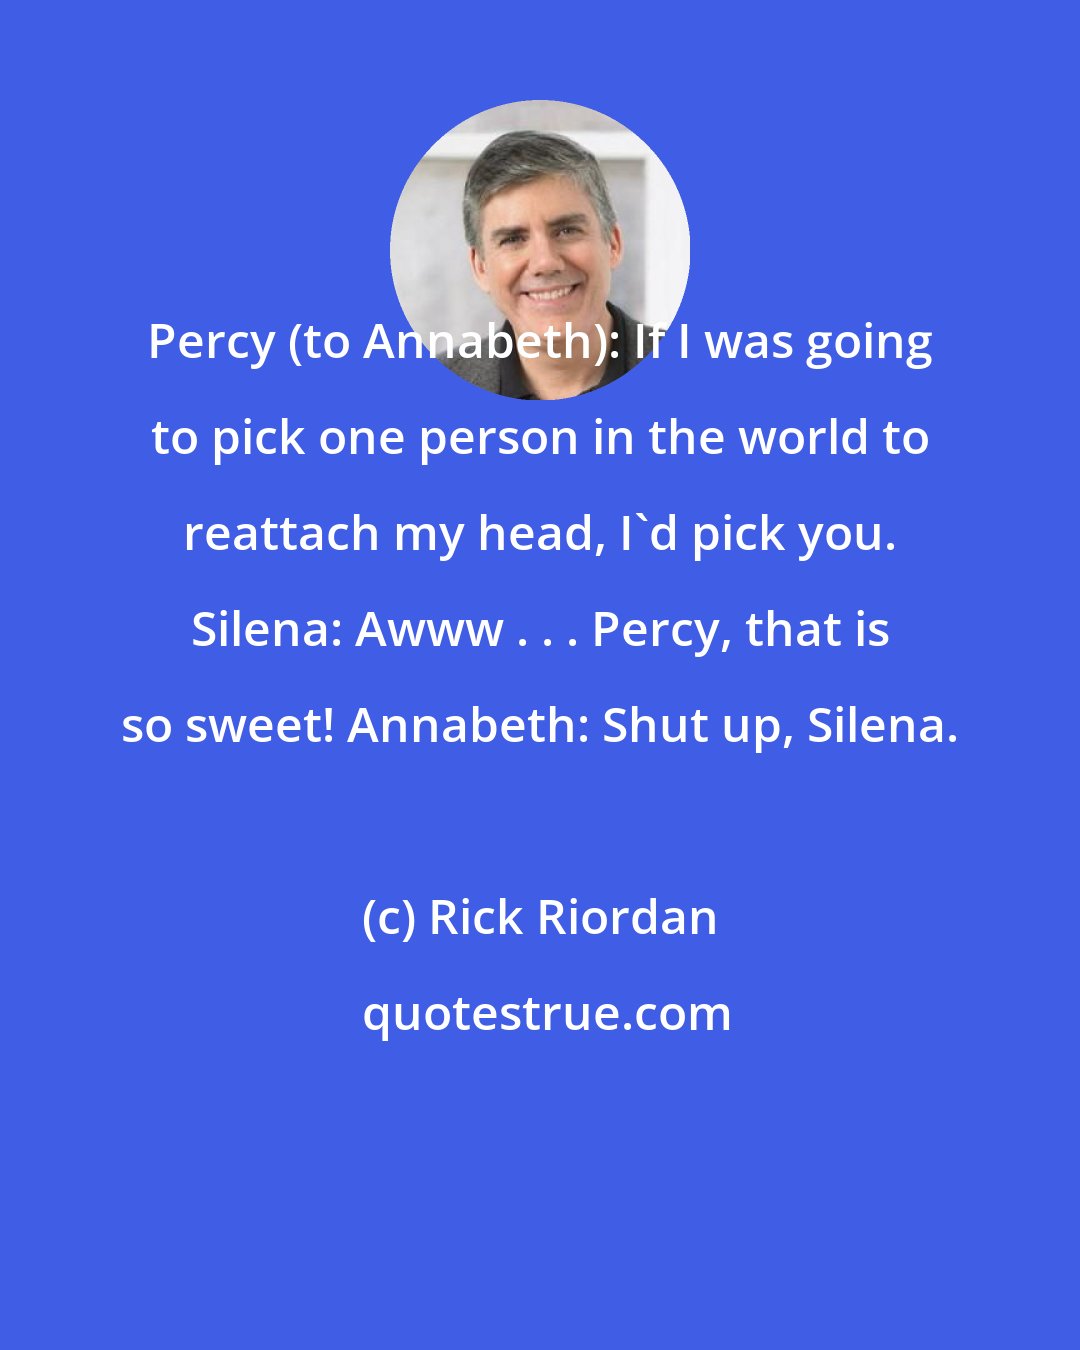 Rick Riordan: Percy (to Annabeth): If I was going to pick one person in the world to reattach my head, I'd pick you. Silena: Awww . . . Percy, that is so sweet! Annabeth: Shut up, Silena.